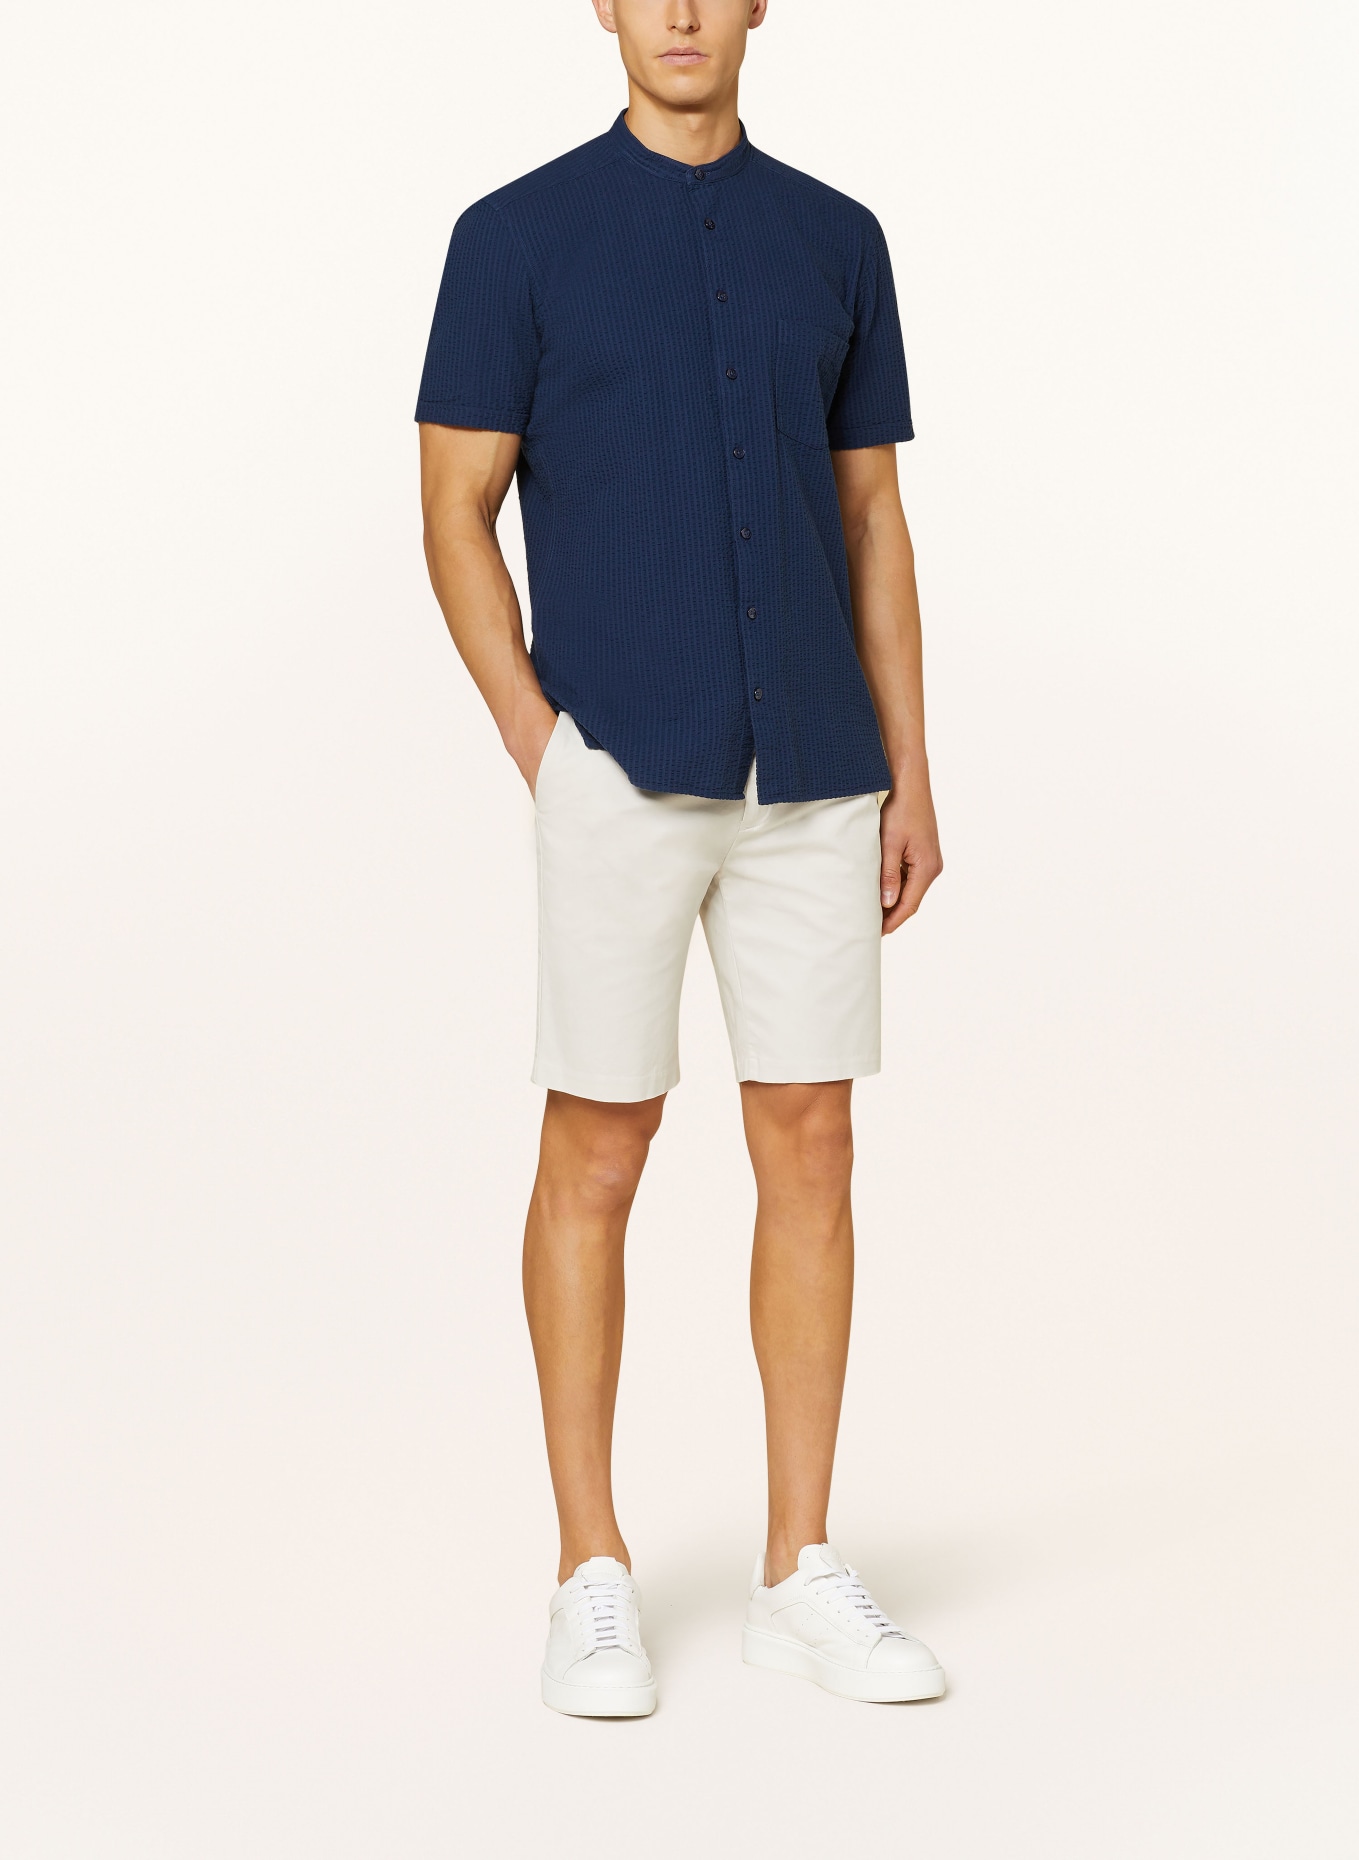 STROKESMAN'S Short sleeve shirt regular fit with stand-up collar, Color: DARK BLUE (Image 2)